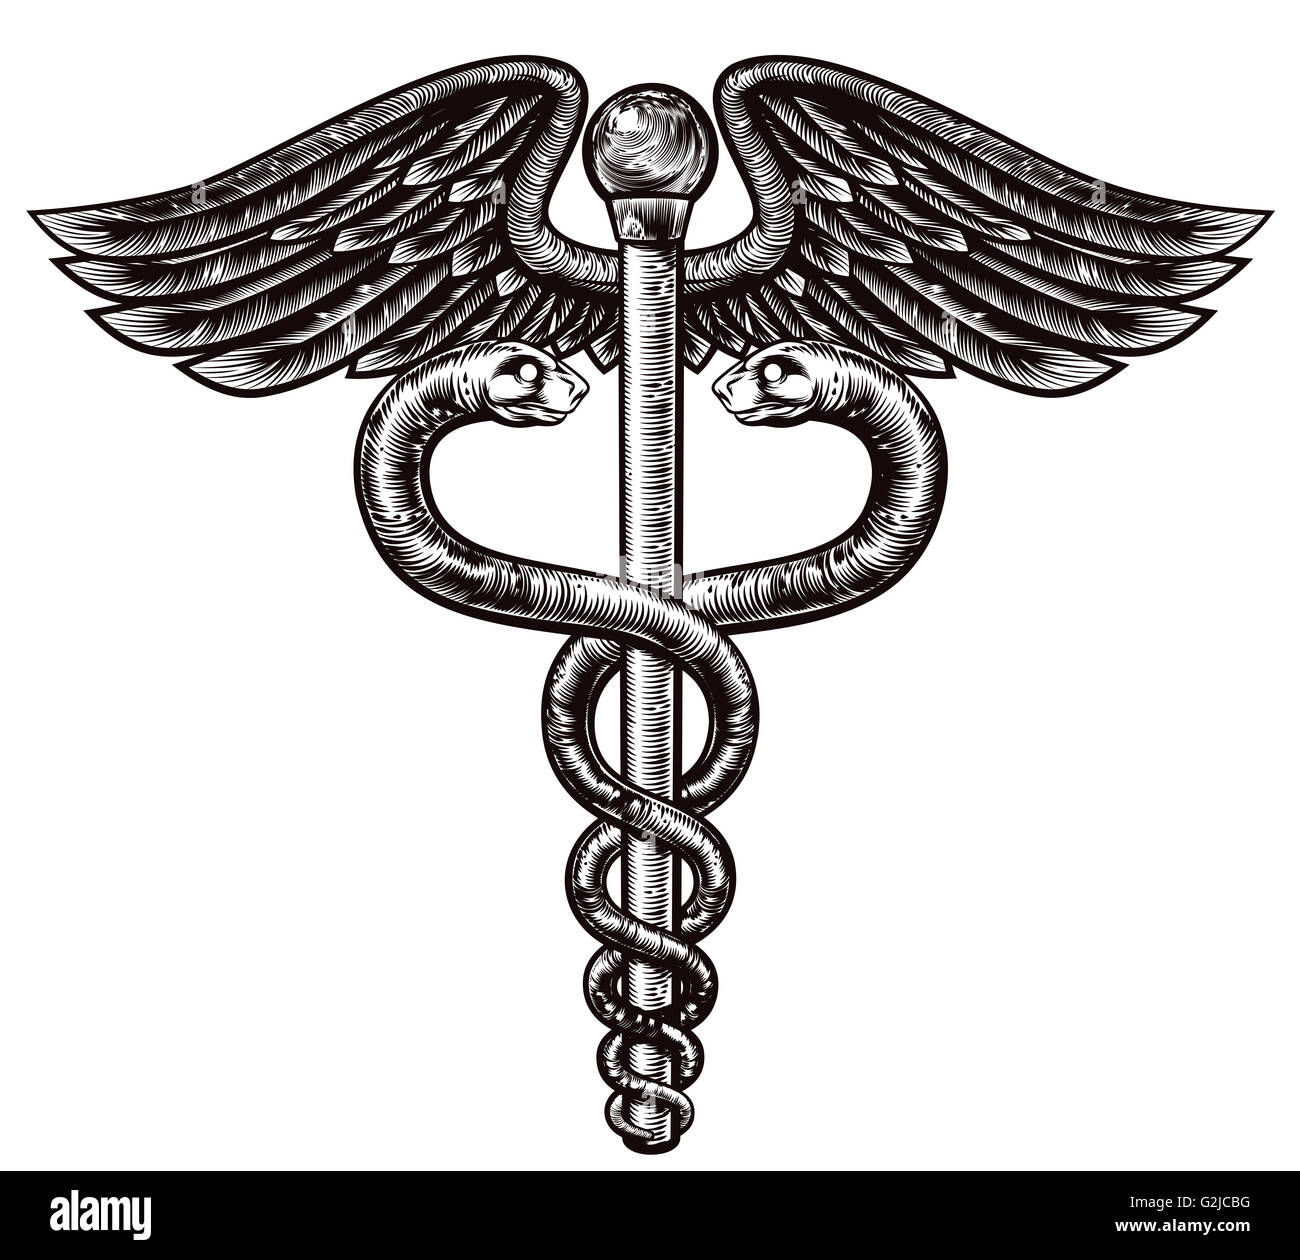 An illustration of the caduceus symbol of two snakes intertwined around a winged rod in a vintage woodcut style. Associated with Stock Photo